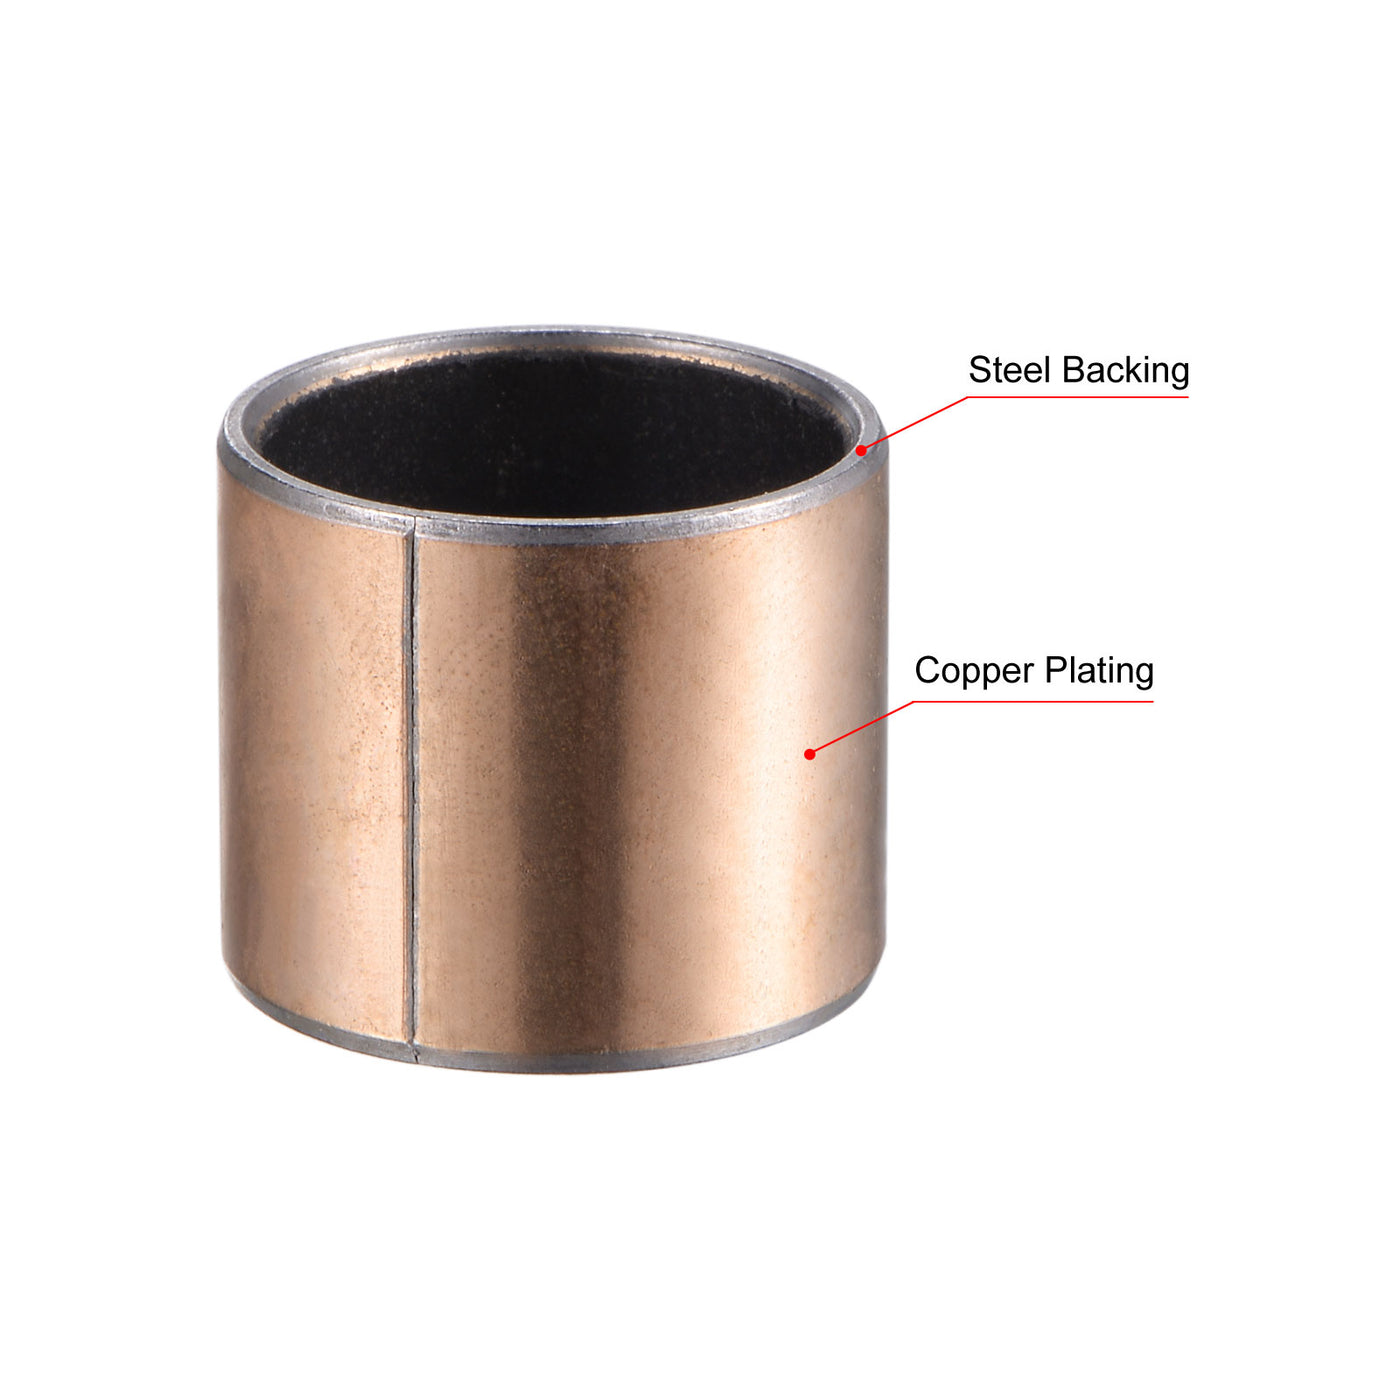 uxcell Uxcell Sleeve Bearings Plain Bearings Wrapped Oilless Bushing